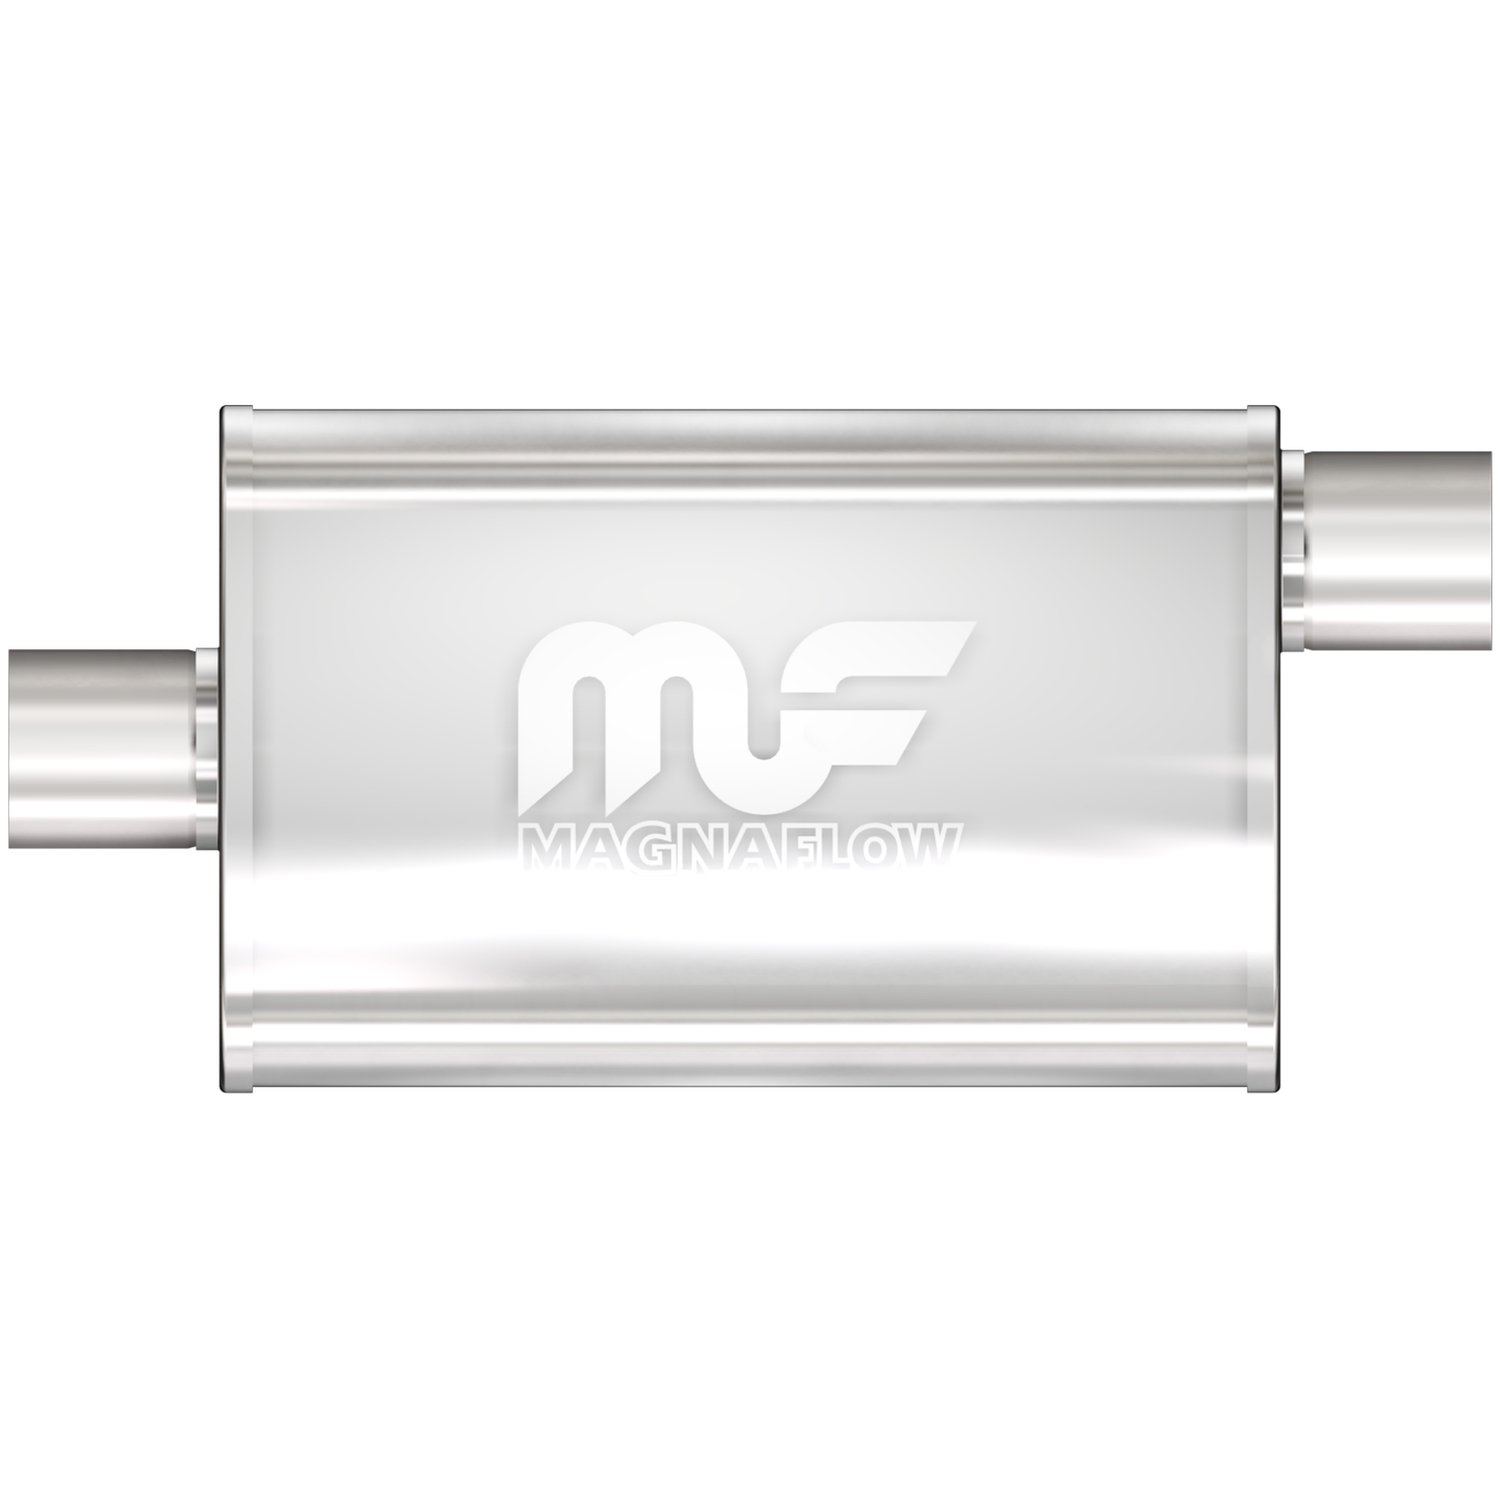 4" x 9" Oval Muffler Offset In/Center Out: 2" Body Length: 18" Overall Length: 24" Core Size: 2.5" Satin Finish